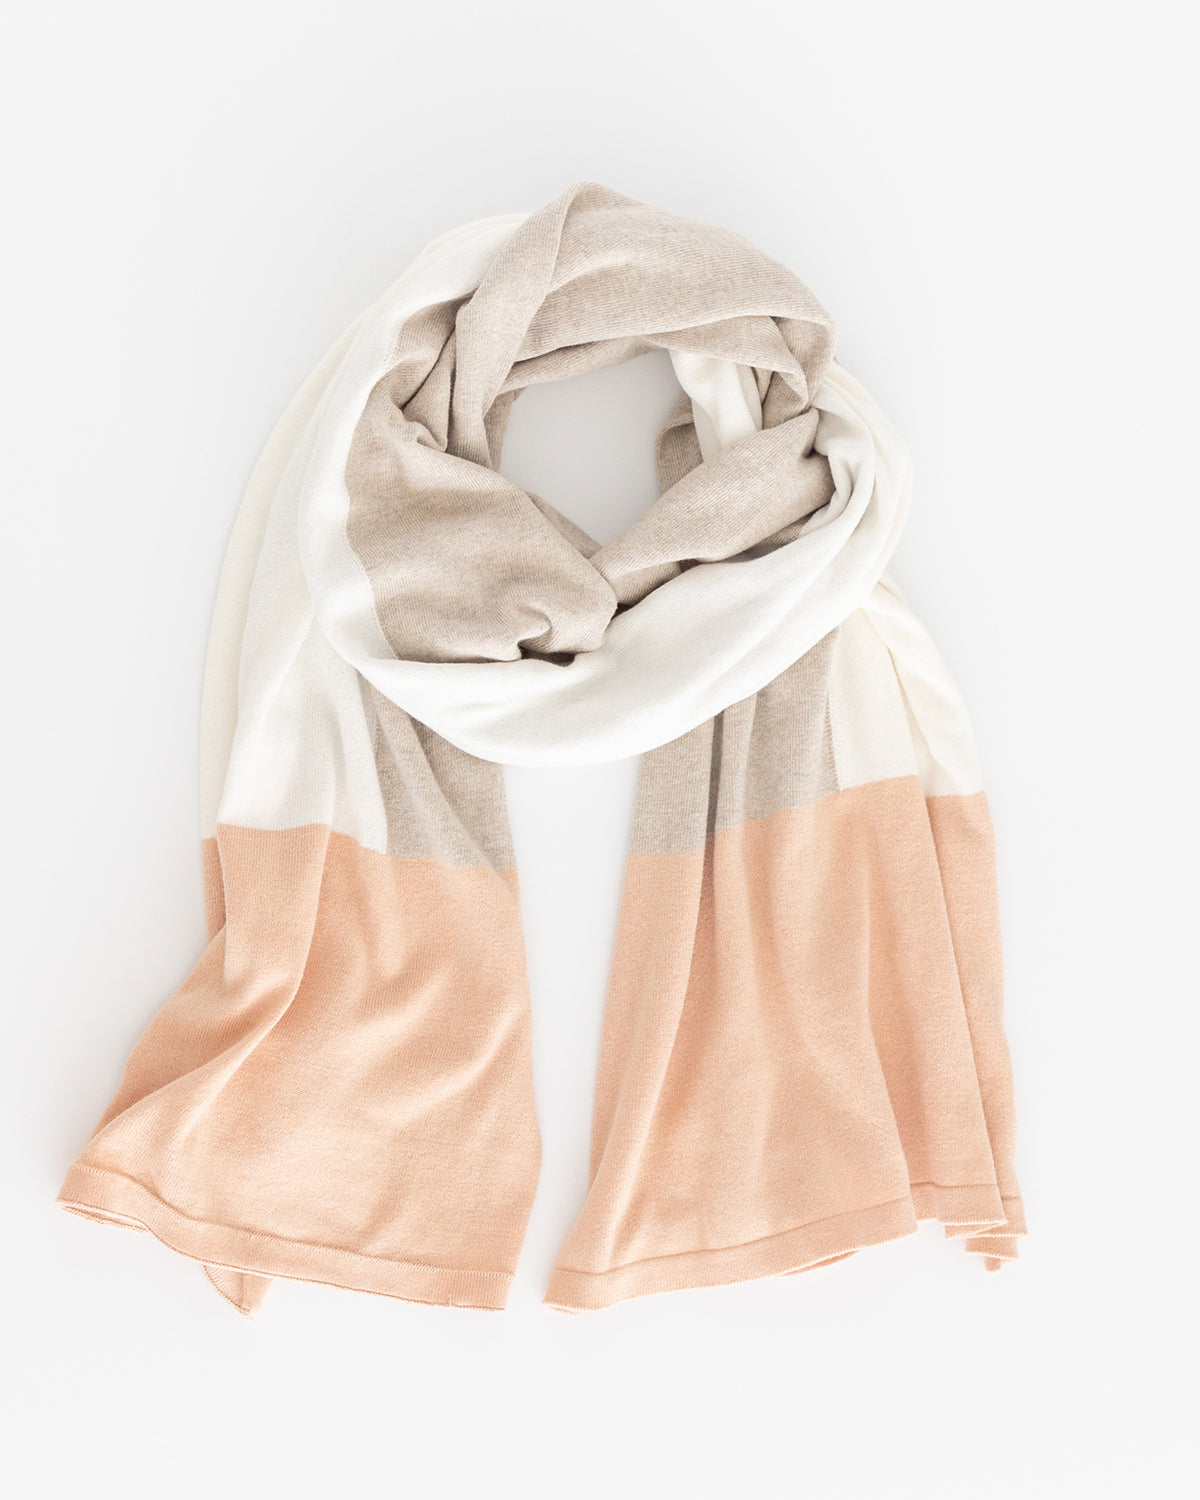 The Dreamsoft Travel Scarf in Blush Colorblock which is a pink, tan and cream scarf